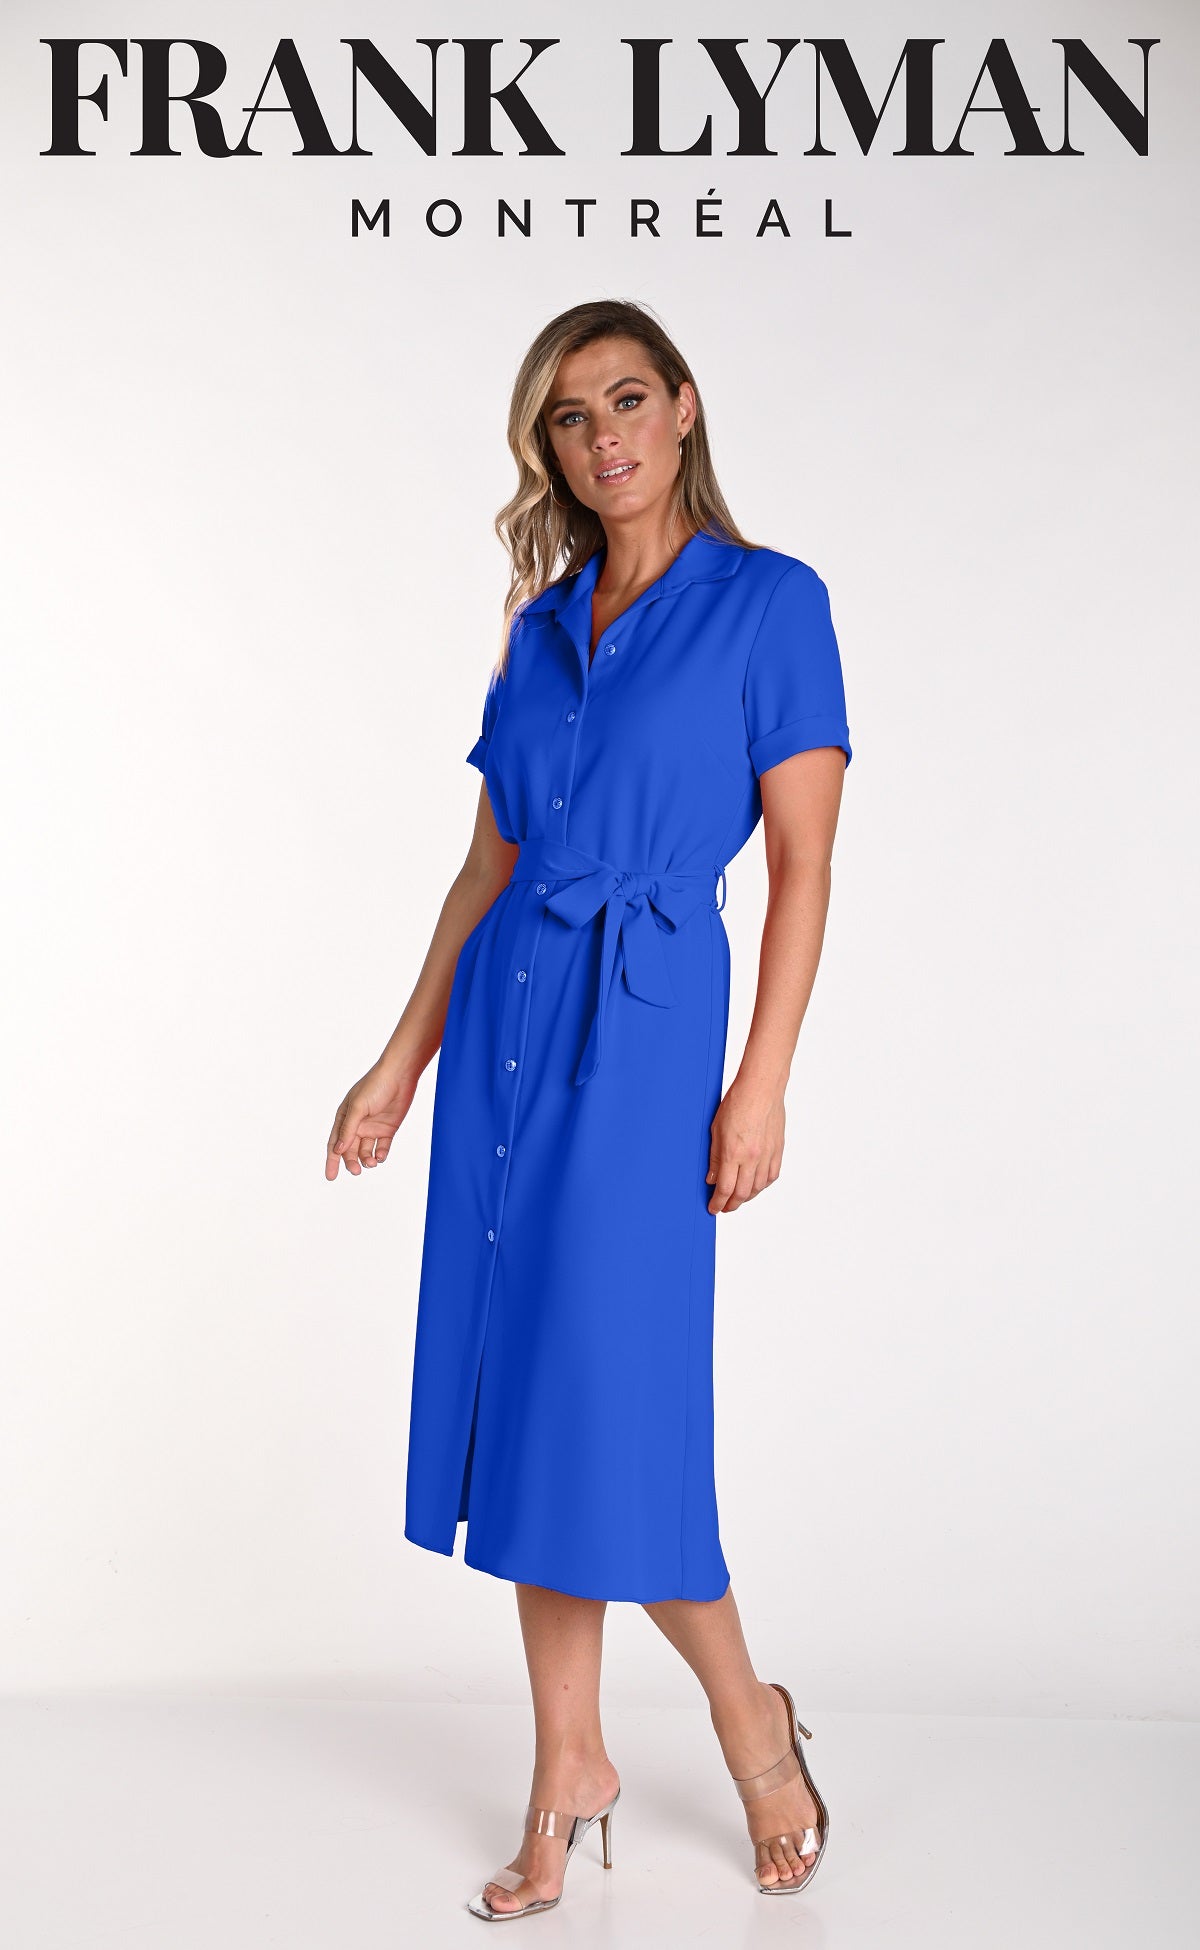 Frank Lyman Montreal Royal Blue Midi Length Dress With Full button front and belt